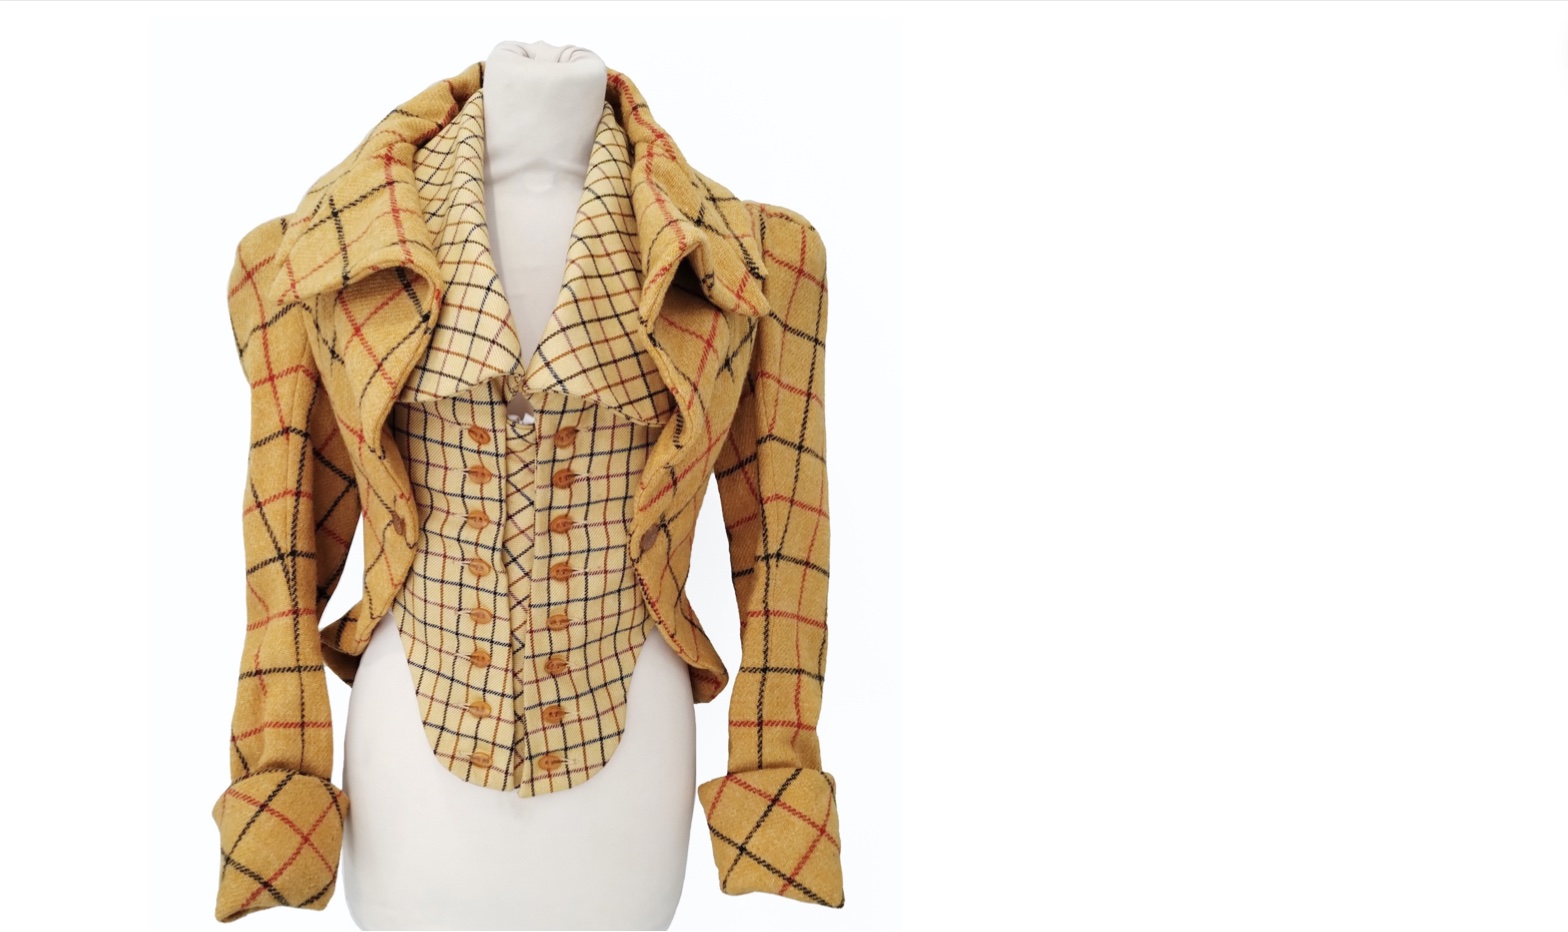 Vivienne Westwood costume collecting to sell – Antique Collecting